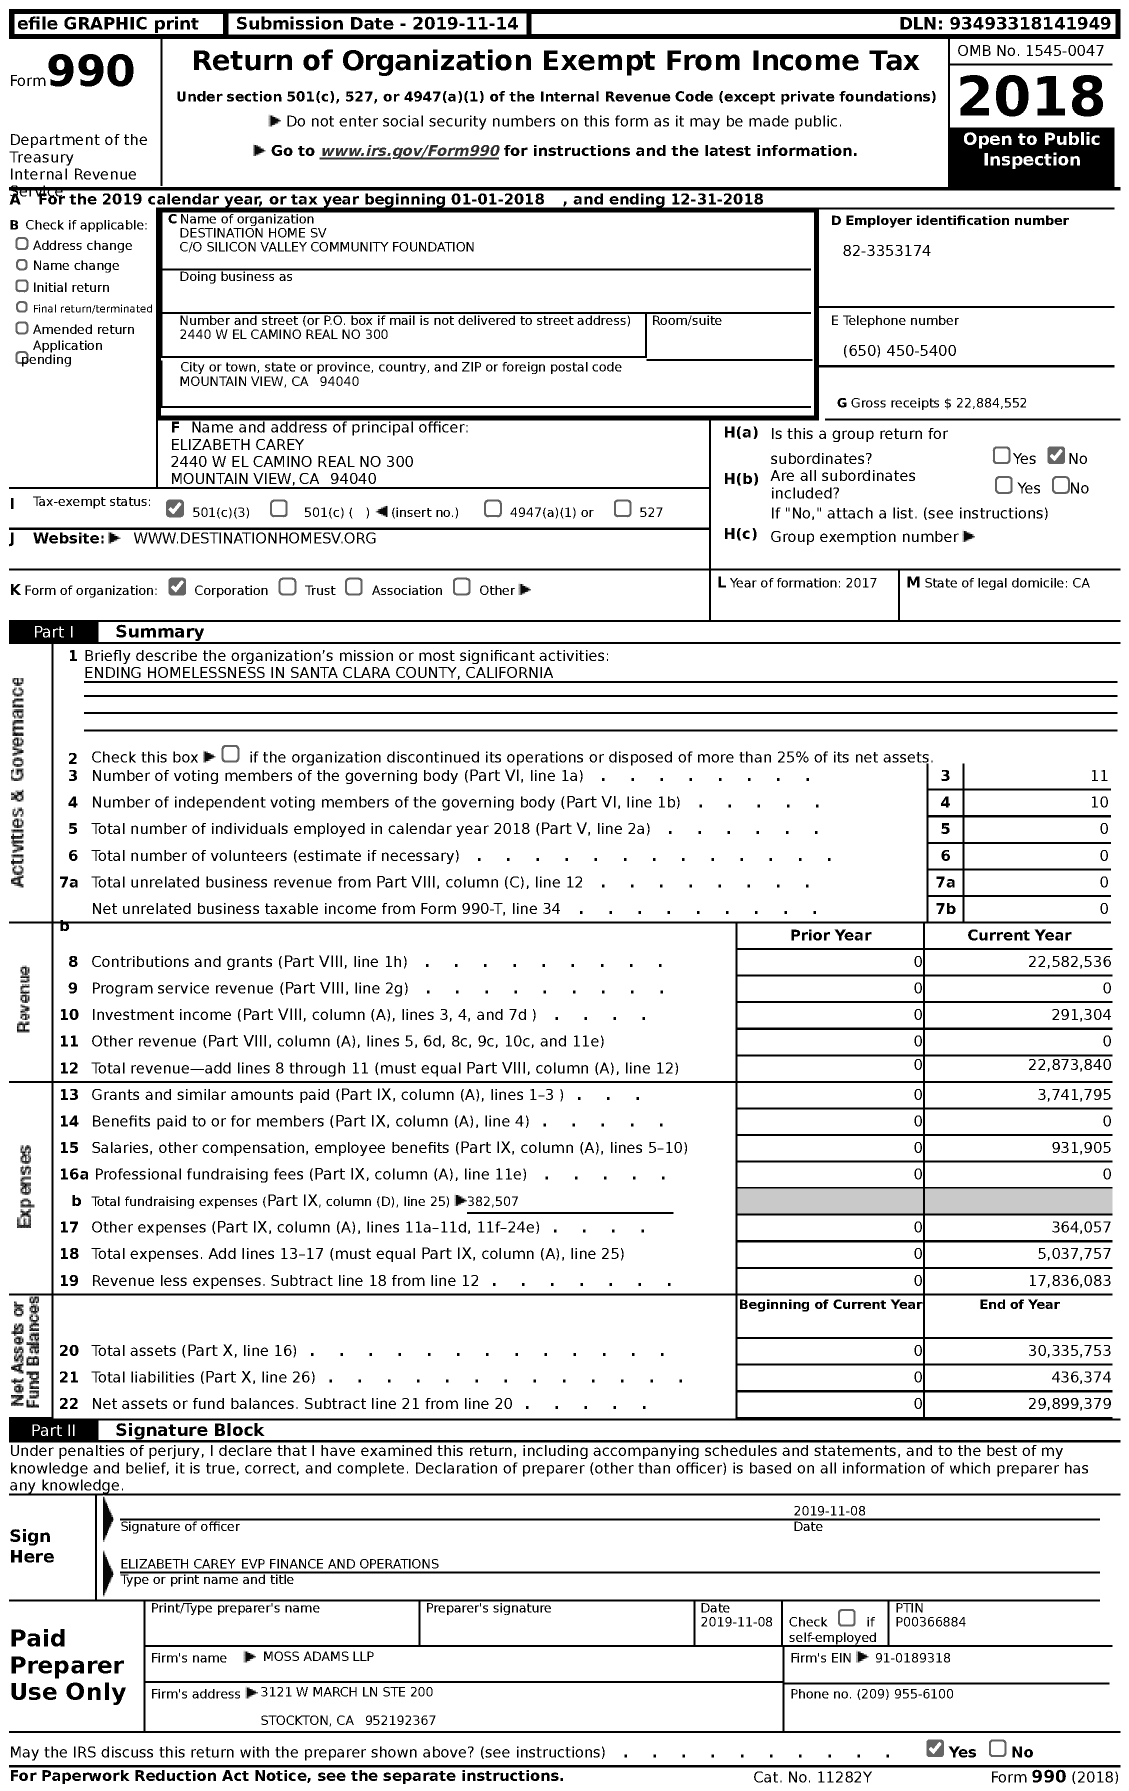 Image of first page of 2018 Form 990 for Destination Home SV CO SILICON Valley COMMUNITY FOUNDATION